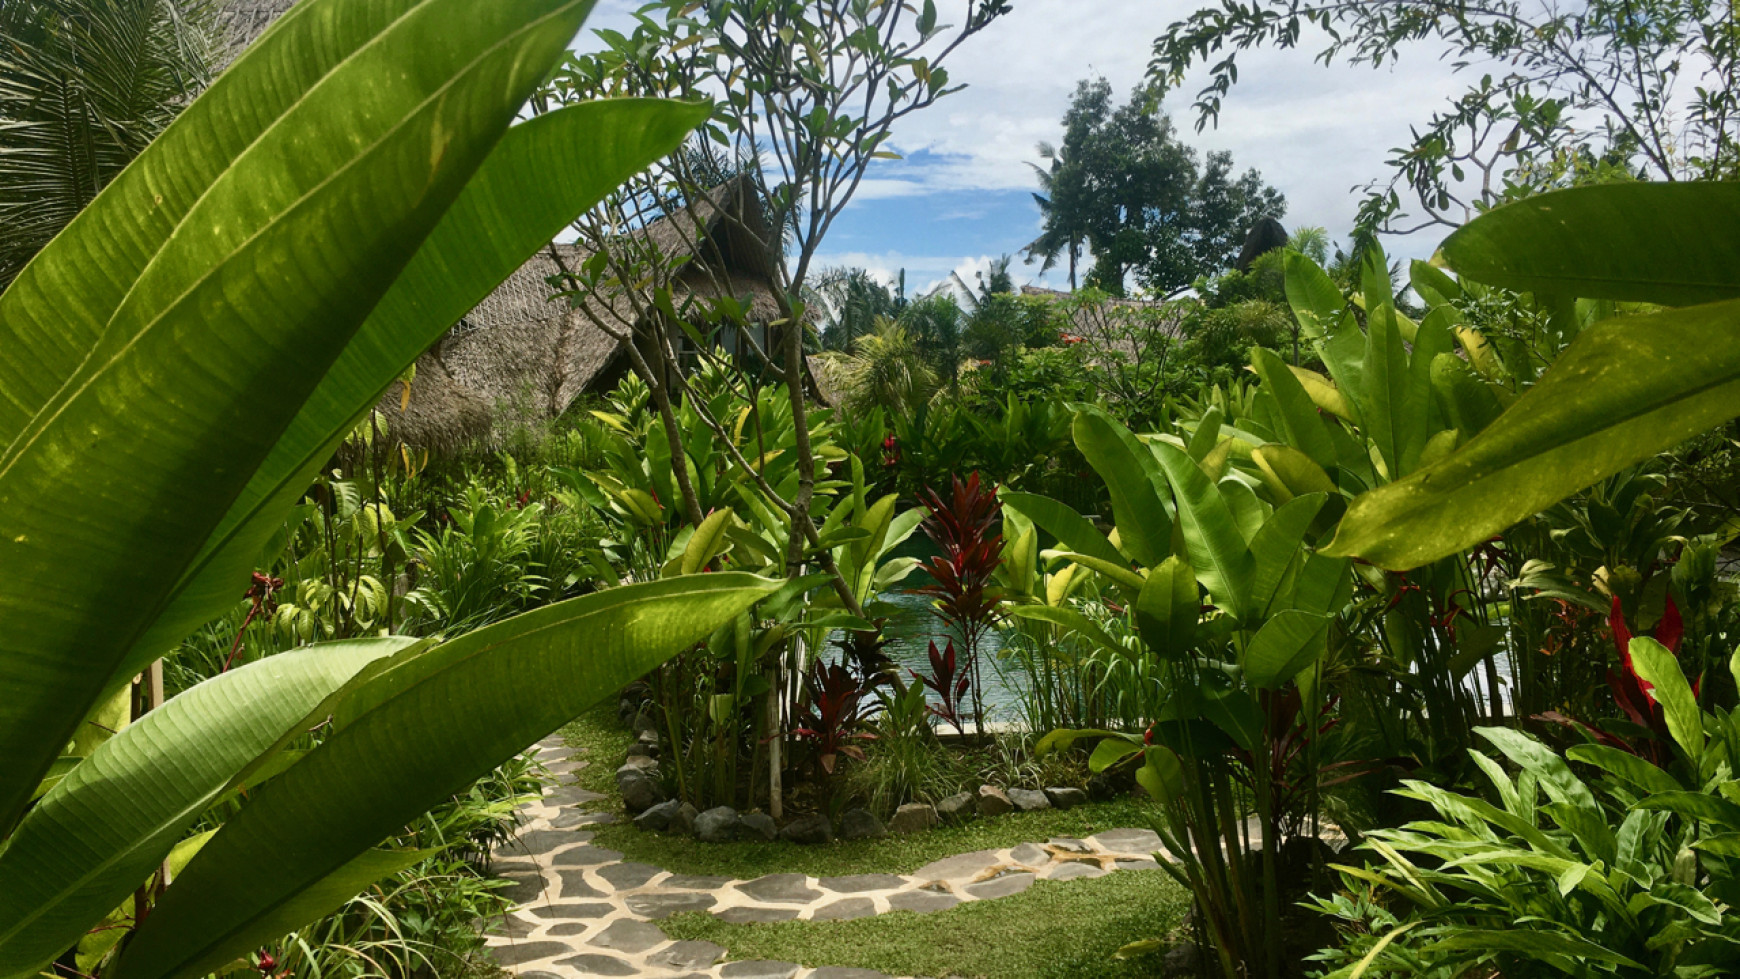 3 Bedroom Leasehold Villa for Sale Located 5 Minutes from Ubud Center